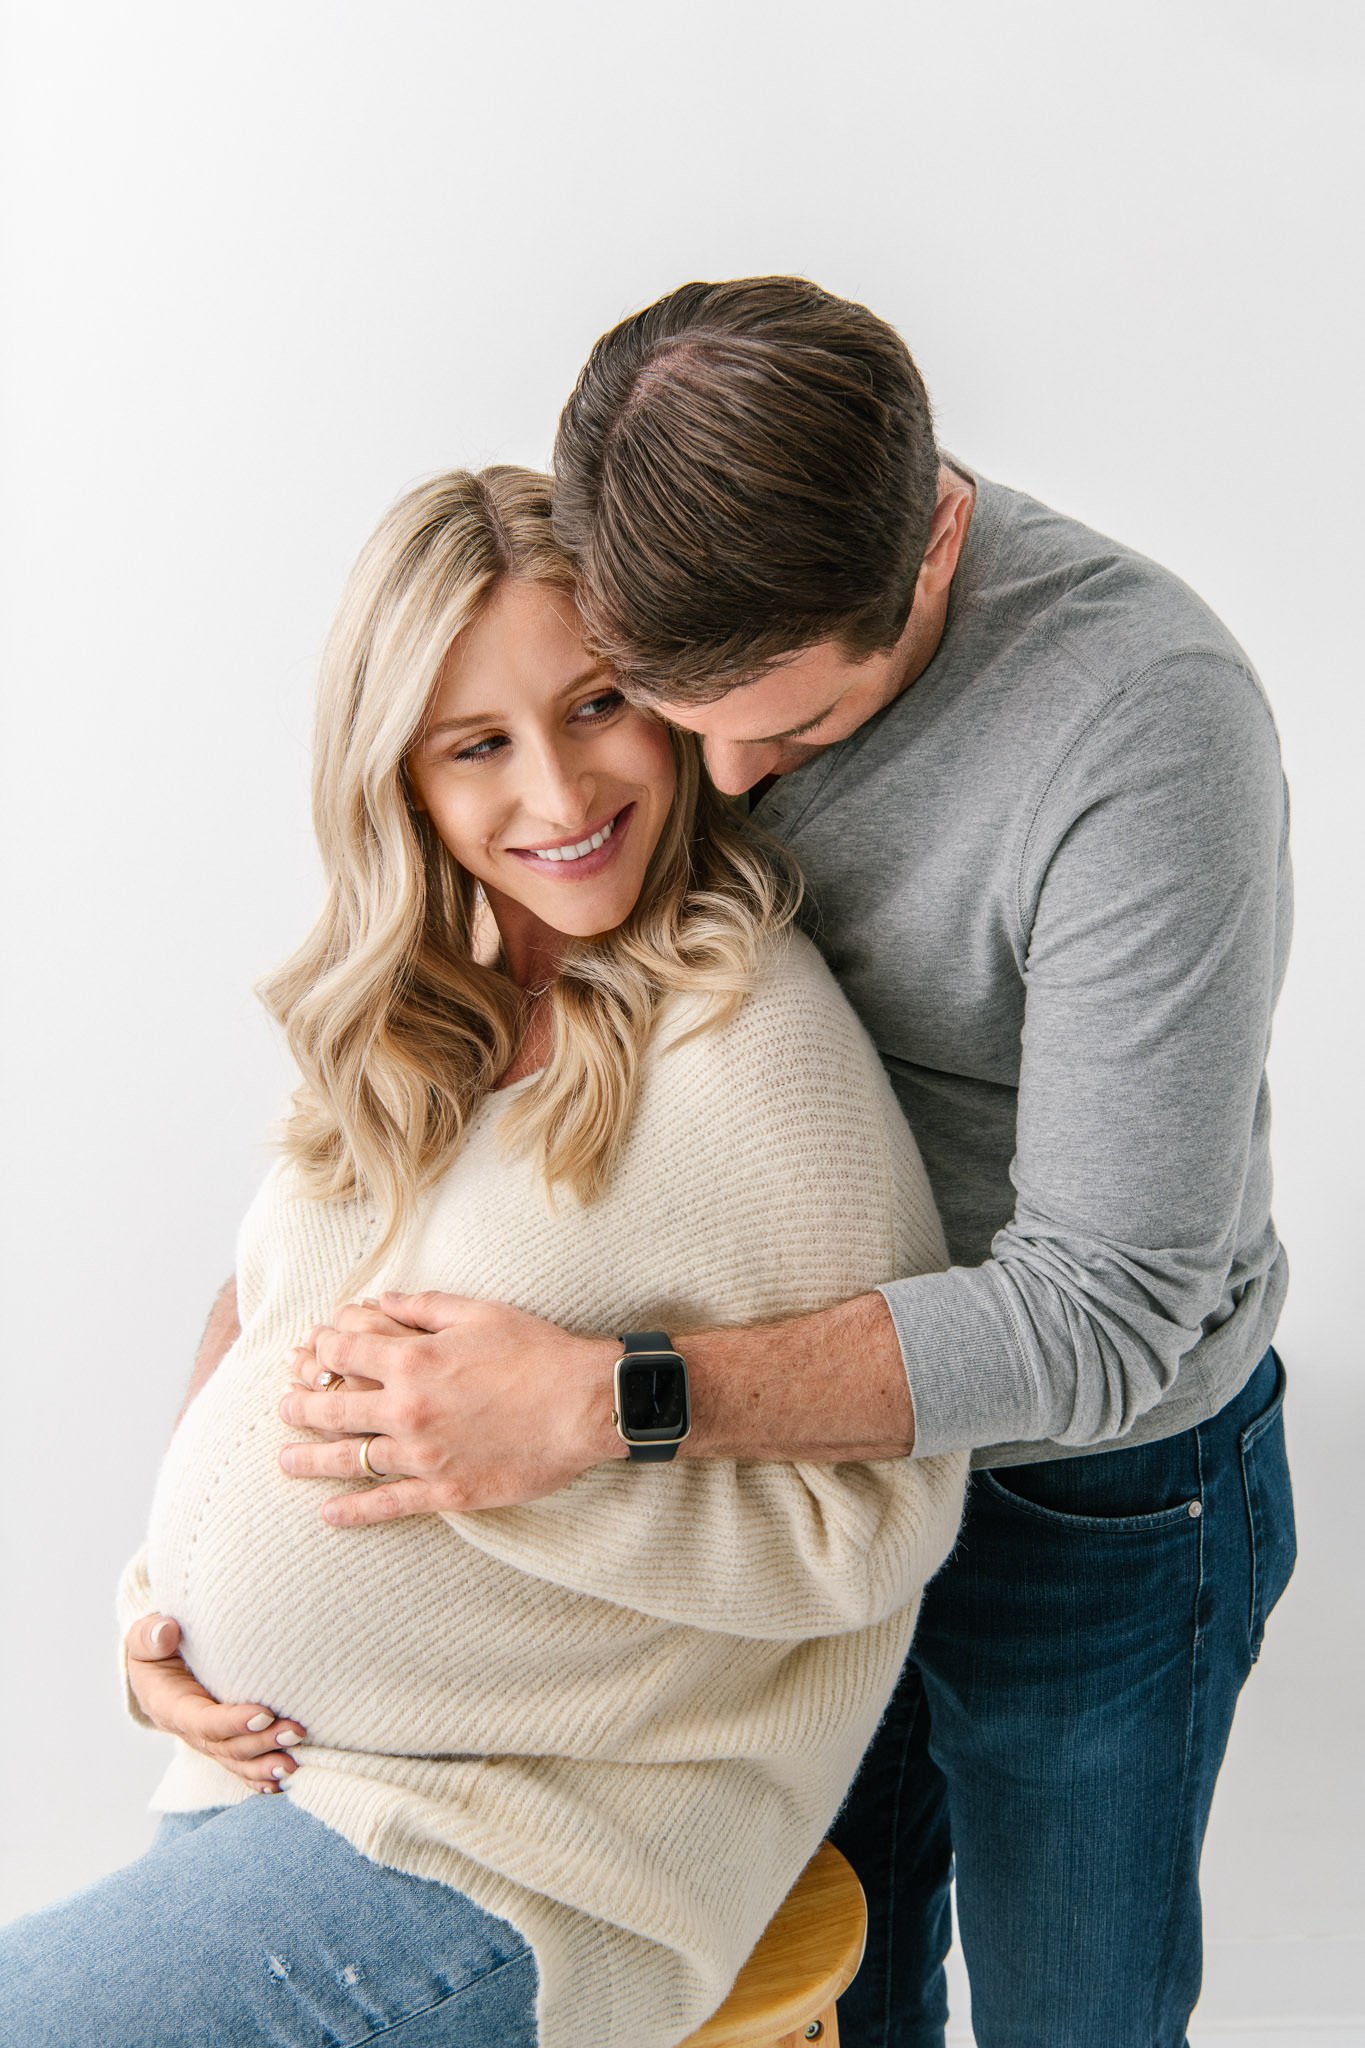  Dad-to-be feels the baby kick in the womb captured by Nicole Hawkins Photography in northern NJ. parents feel baby kick #NicoleHawkinsPhotography #NicoleHawkinsMaternity #Studiomaternityportraits #NewJerseymaternity #NewYorkMaternity 